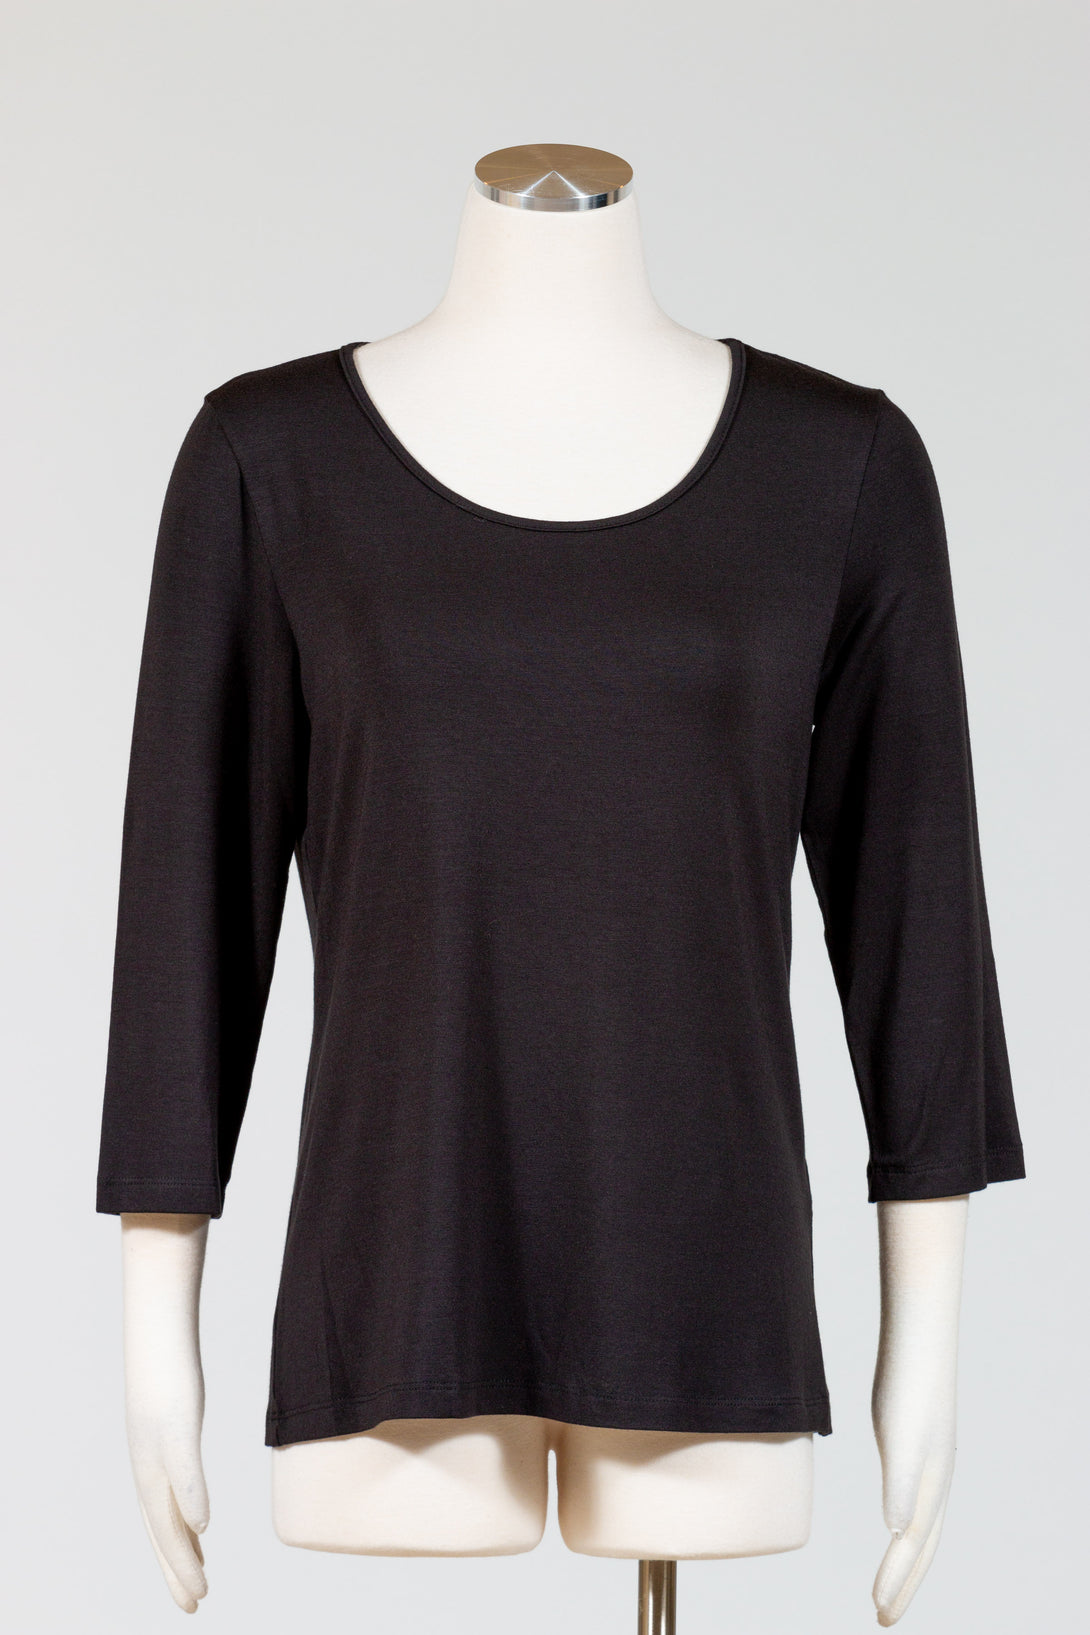 Chalet's 3/4 Sleeve Basic Top is a basic tee with a three quarter sleeve and modest scoop neckline.